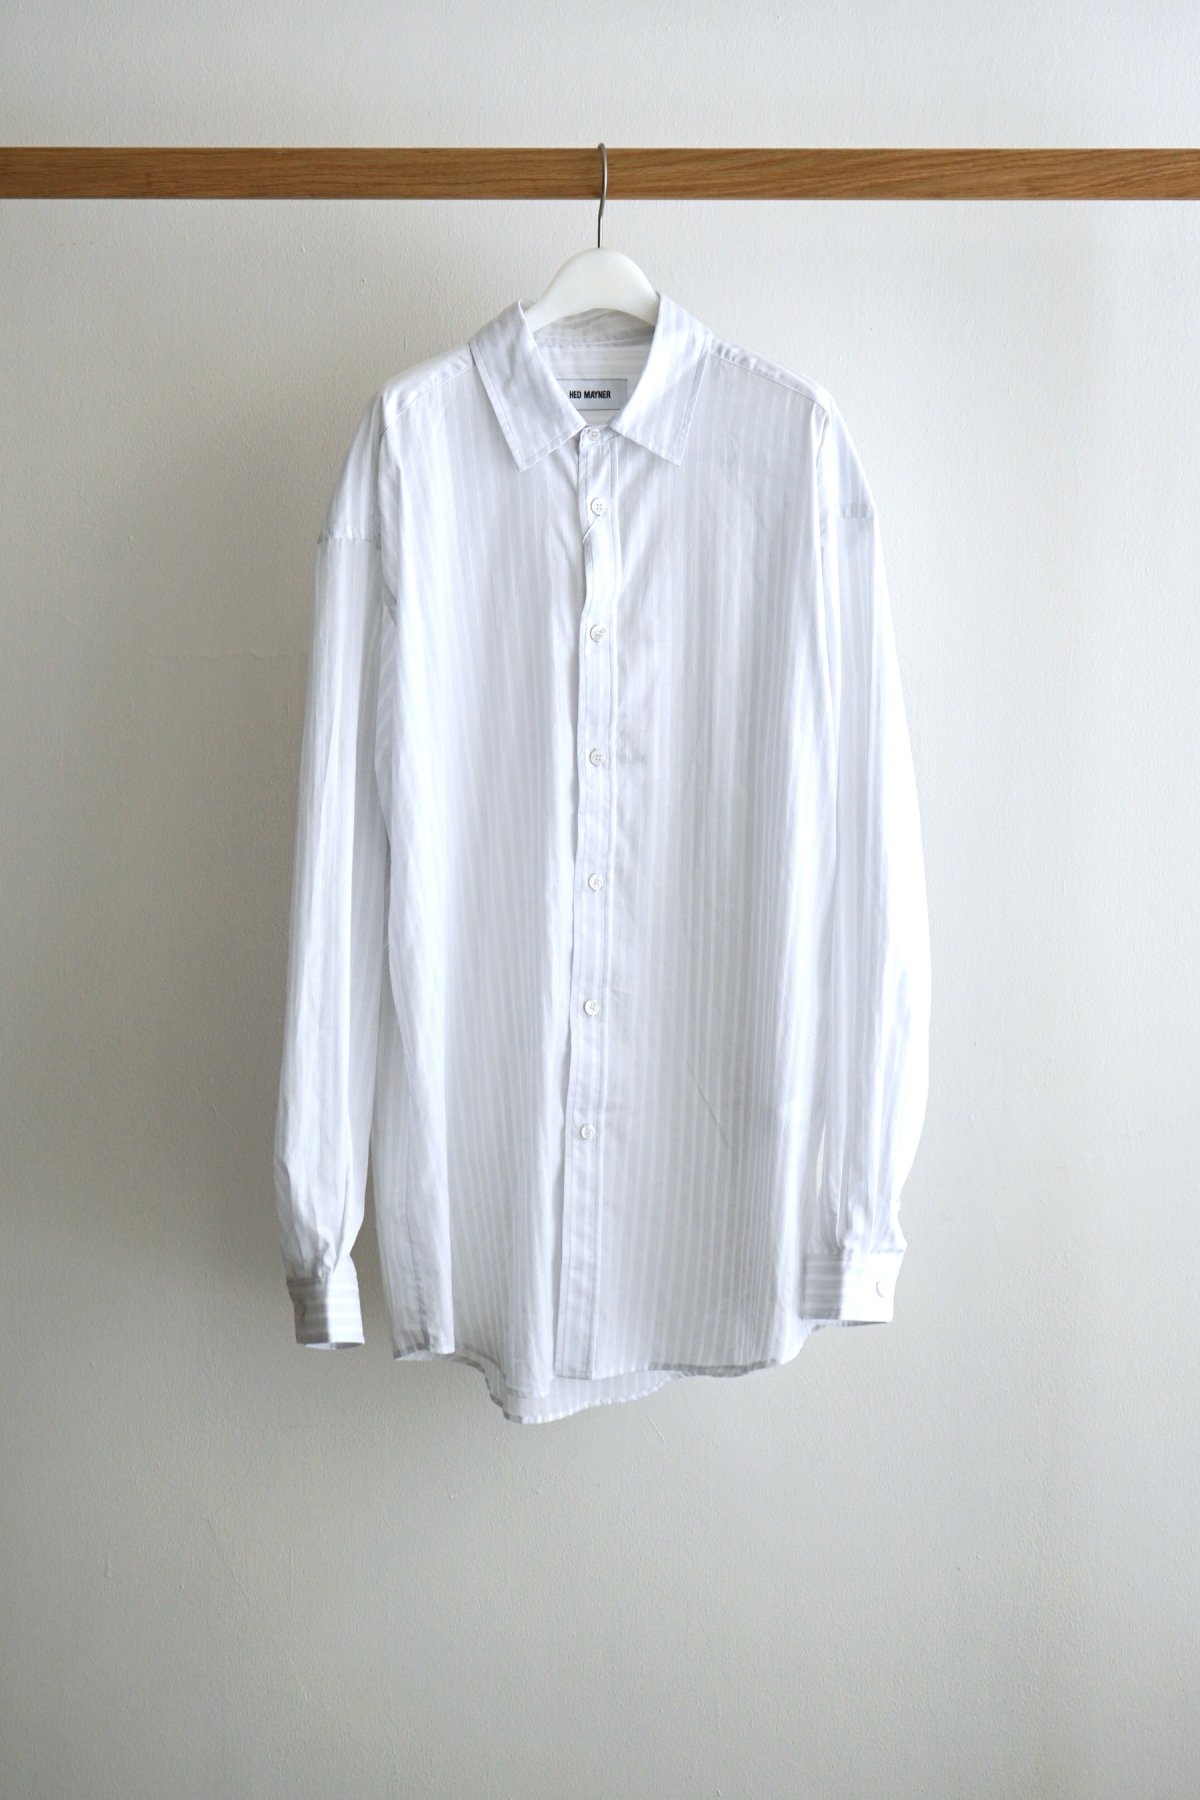 HED MAYNER / Buttoned Shirt / Grey and White Chunky Stripes